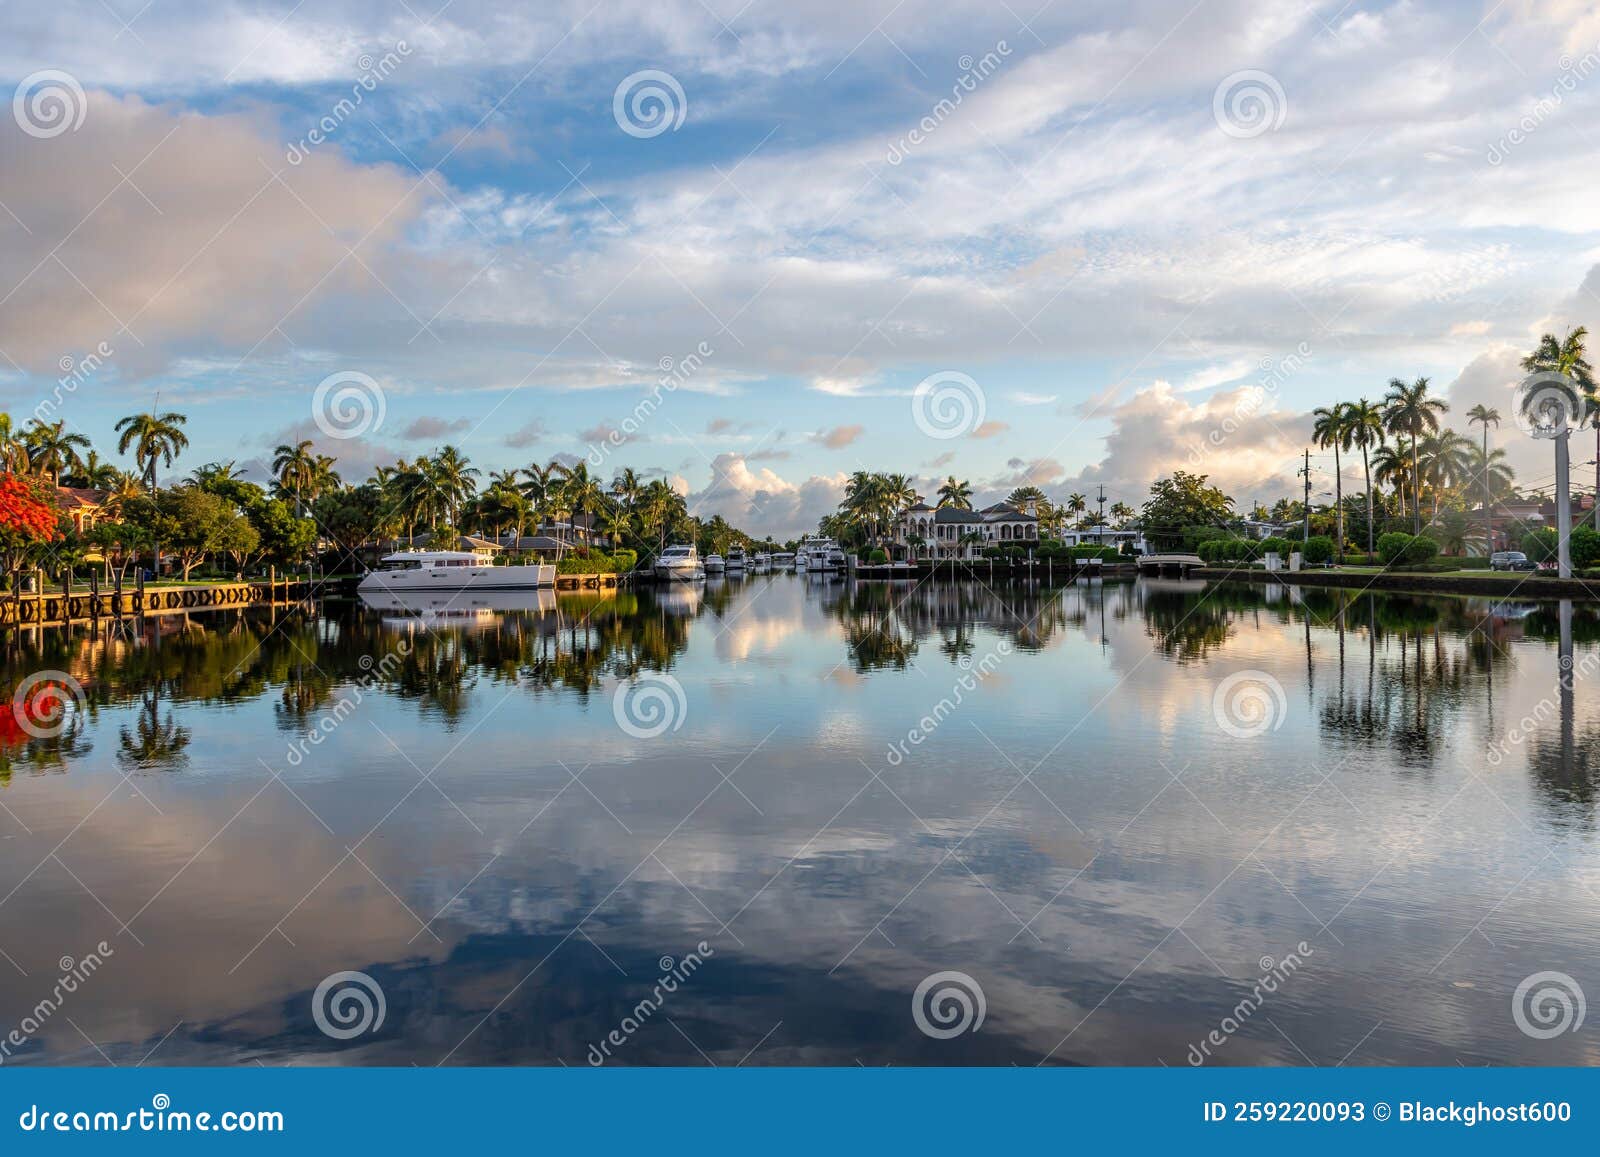 beautiful view of boats and luxury homes line the canals near las olas blvd. in fort lauderdale florida